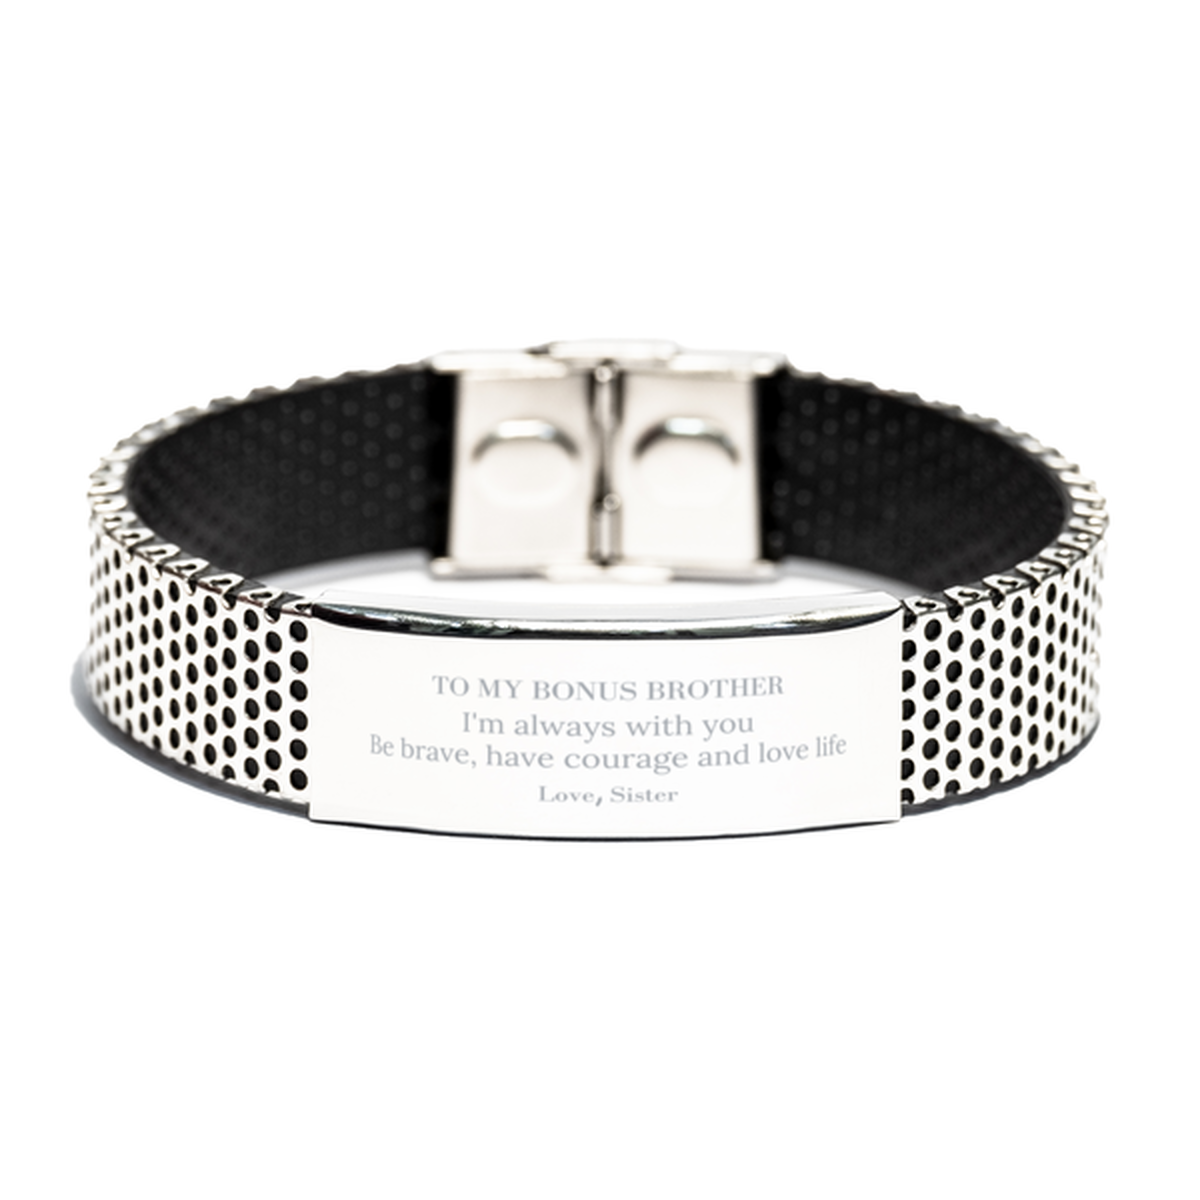 To My Bonus Brother Gifts from Sister, Unique Stainless Steel Bracelet Inspirational Christmas Birthday Graduation Gifts for Bonus Brother I'm always with you. Be brave, have courage and love life. Love, Sister